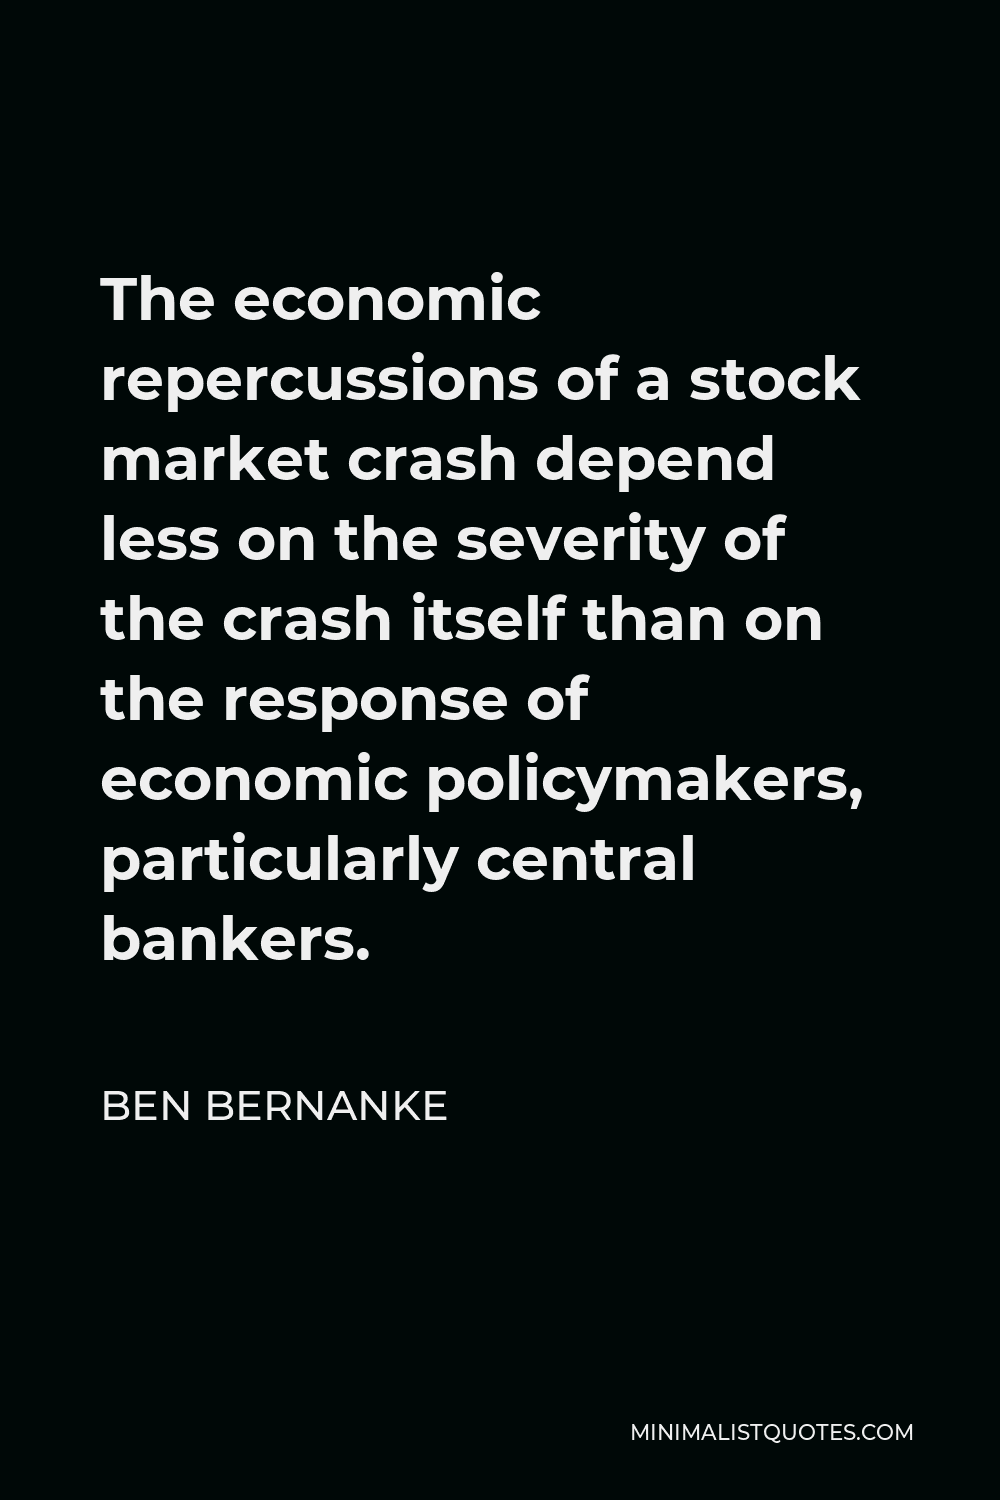 Ben Bernanke Quote - The economic repercussions of a stock market crash depend less on the severity of the crash itself than on the response of economic policymakers, particularly central bankers.